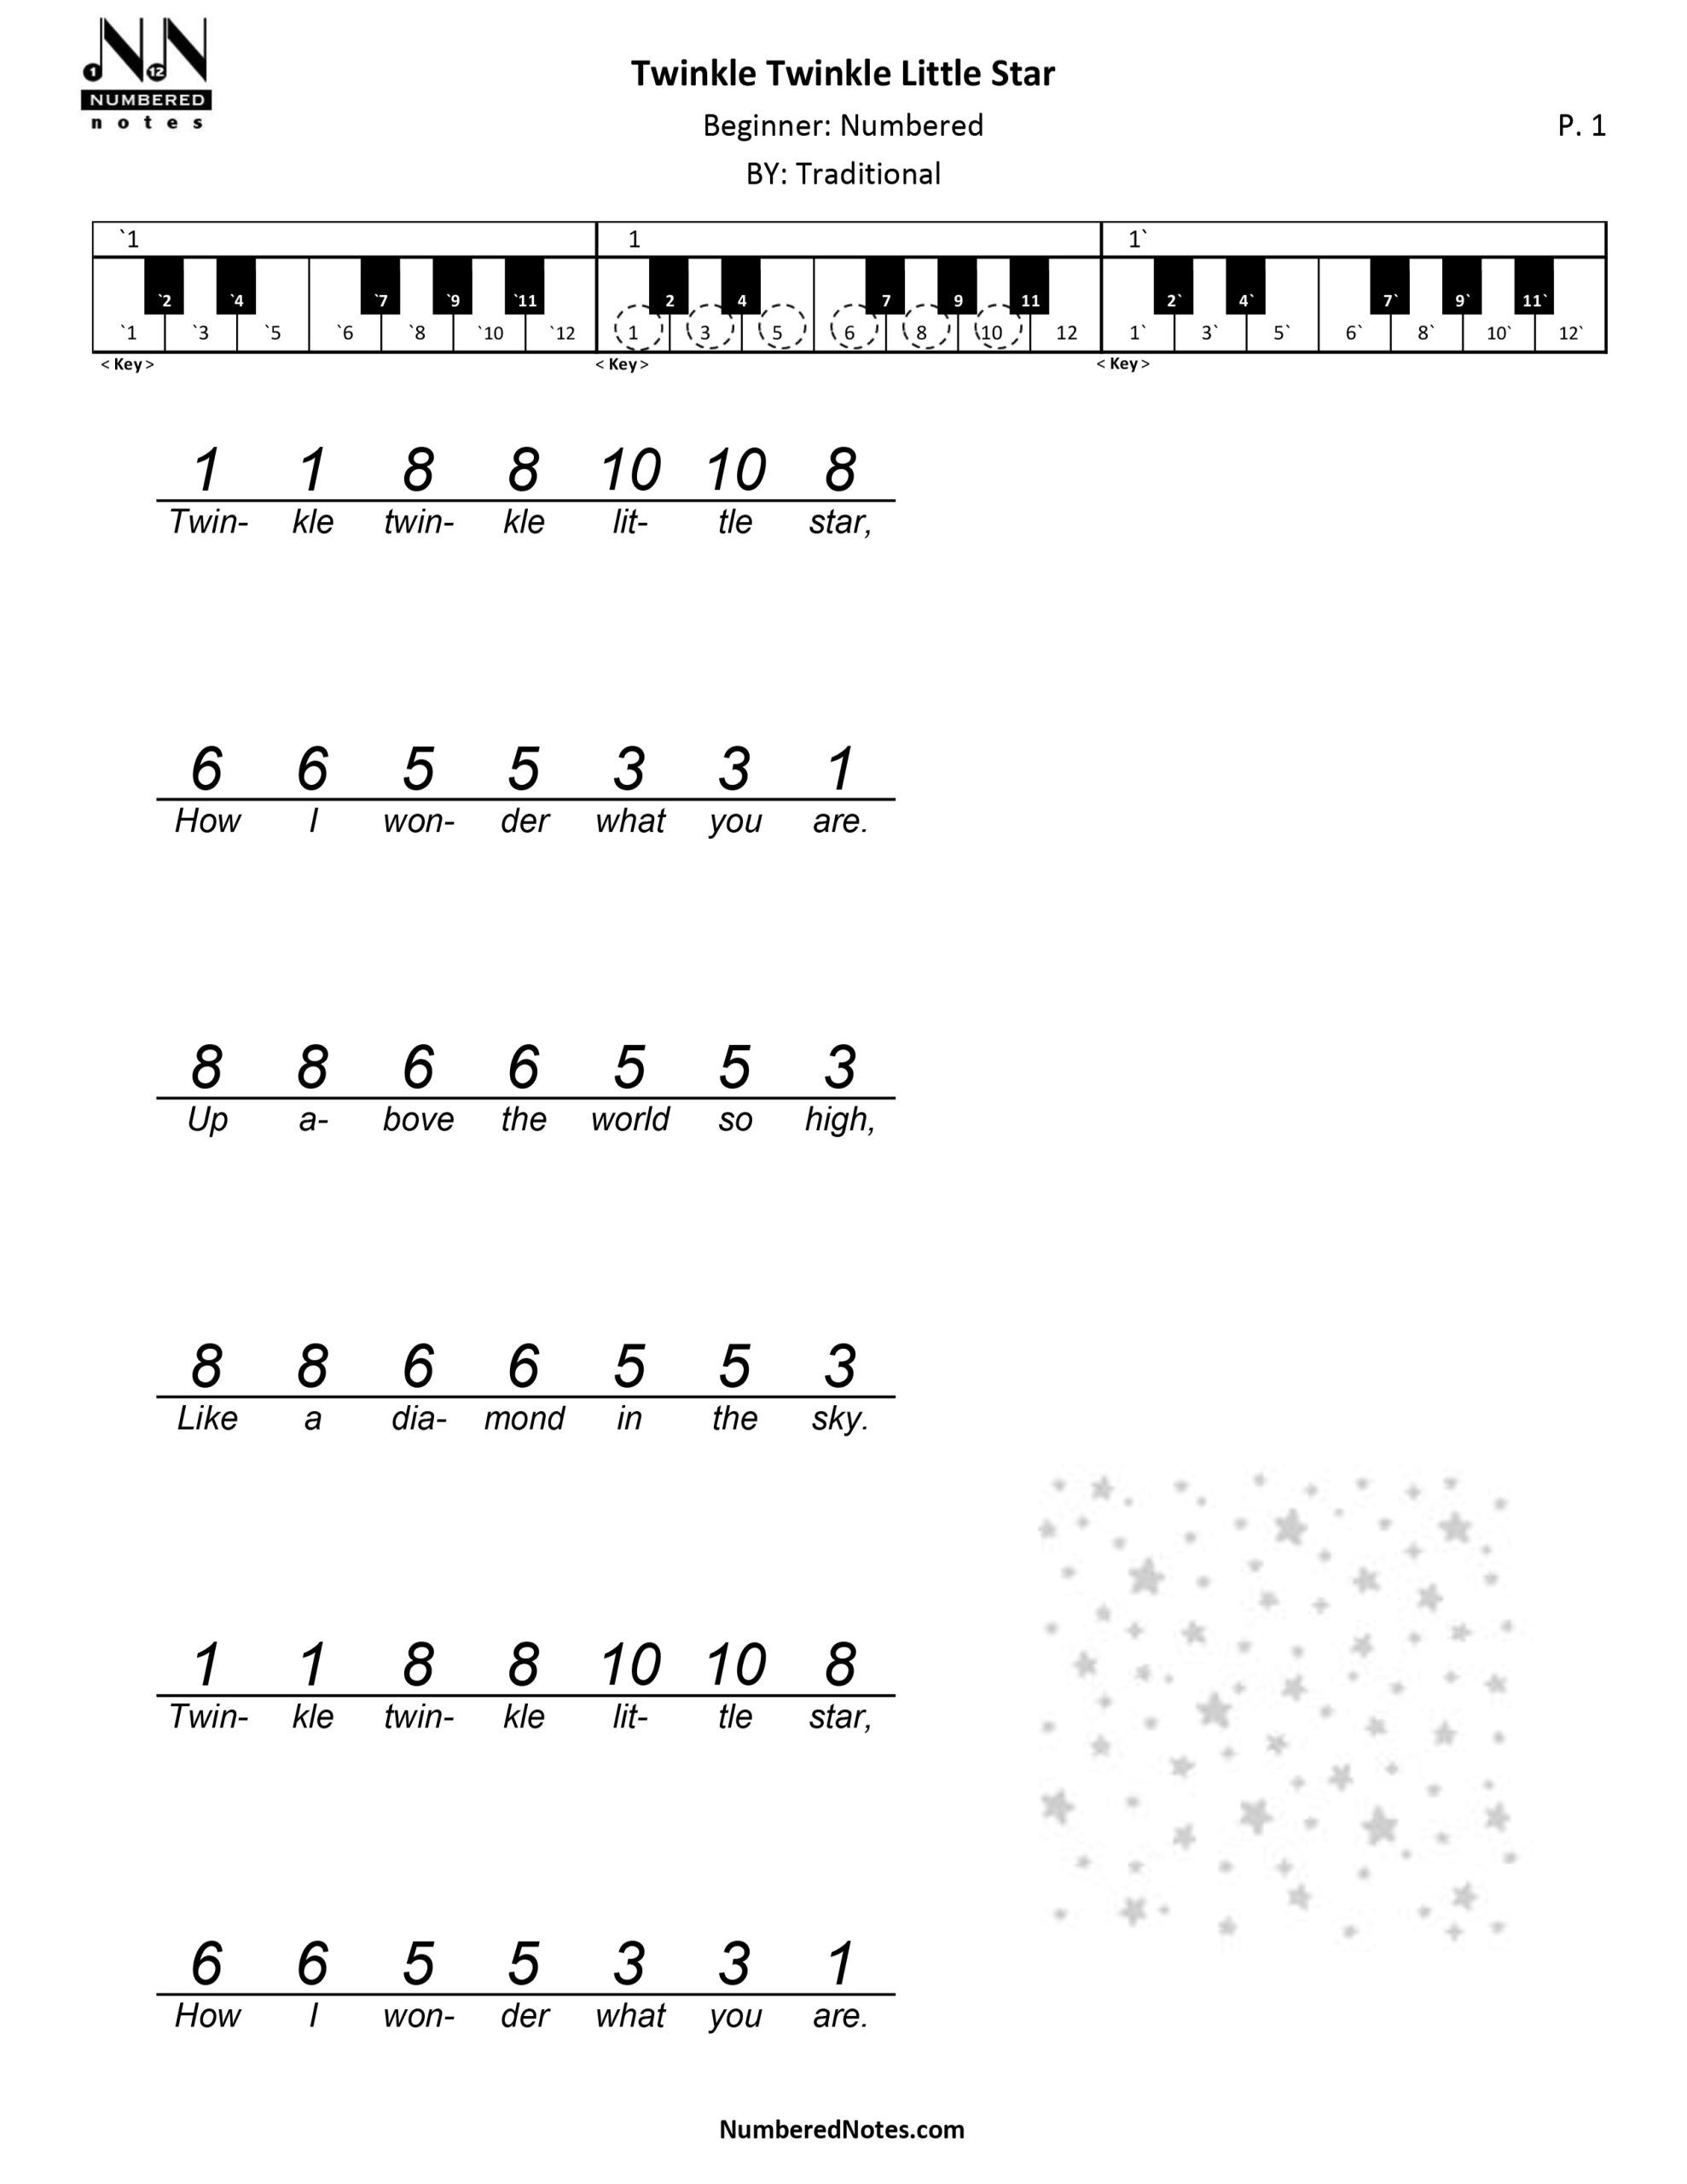 How to Play Twinkle Twinkle Little Star on Piano